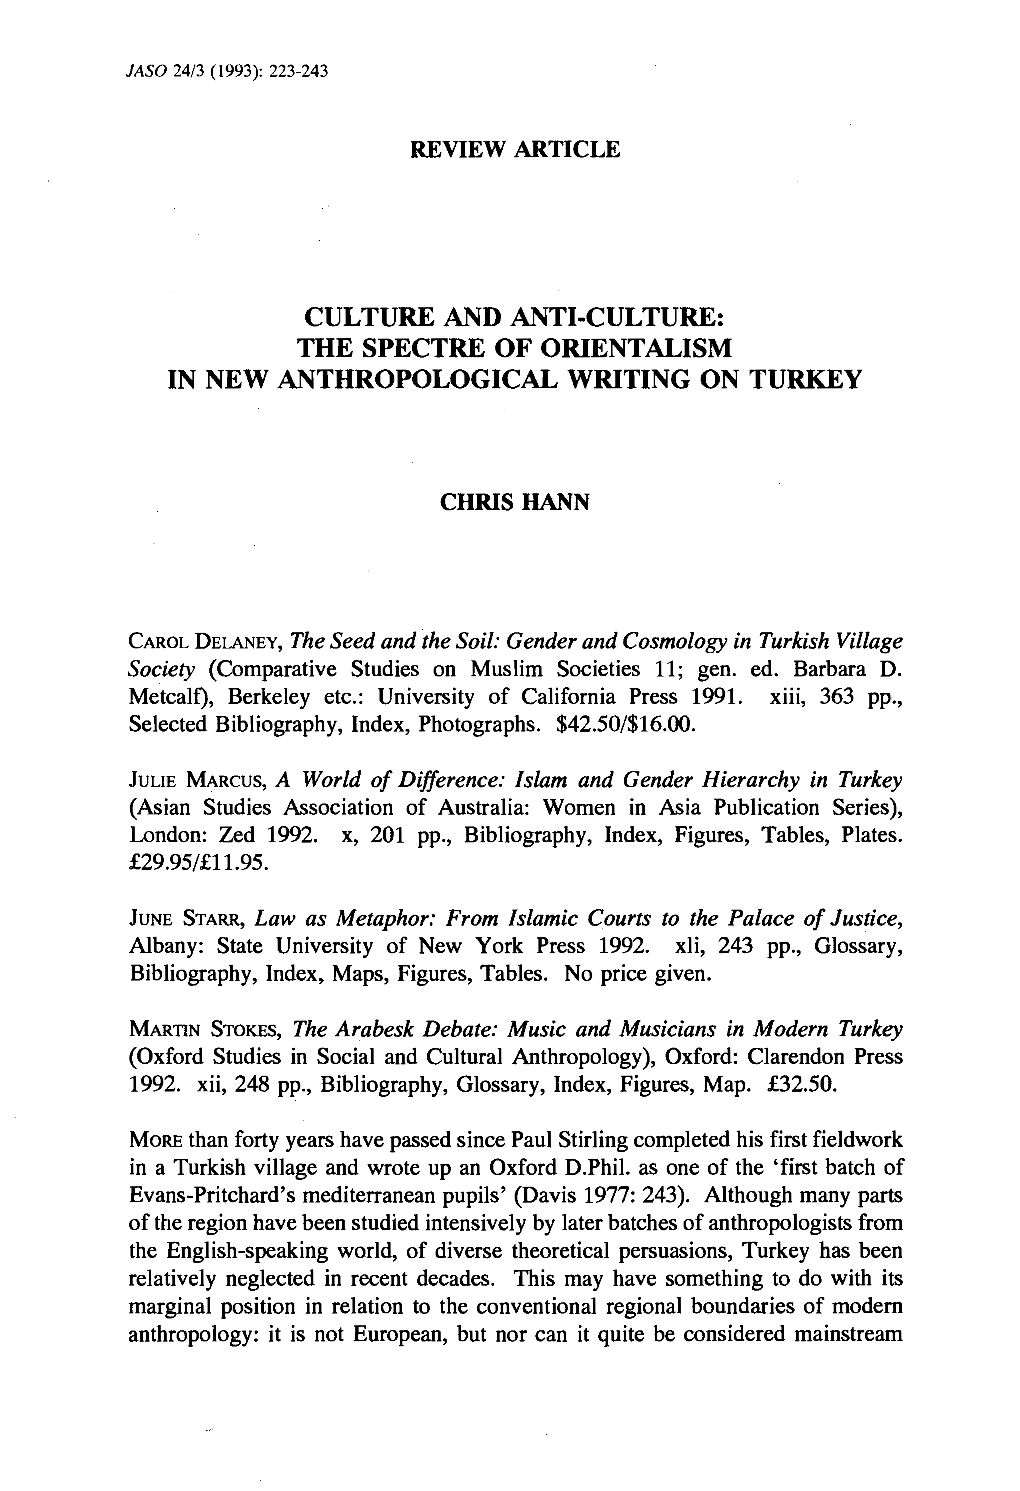 The Spectre of Orientalism in New Anthropological Writing on Turkey